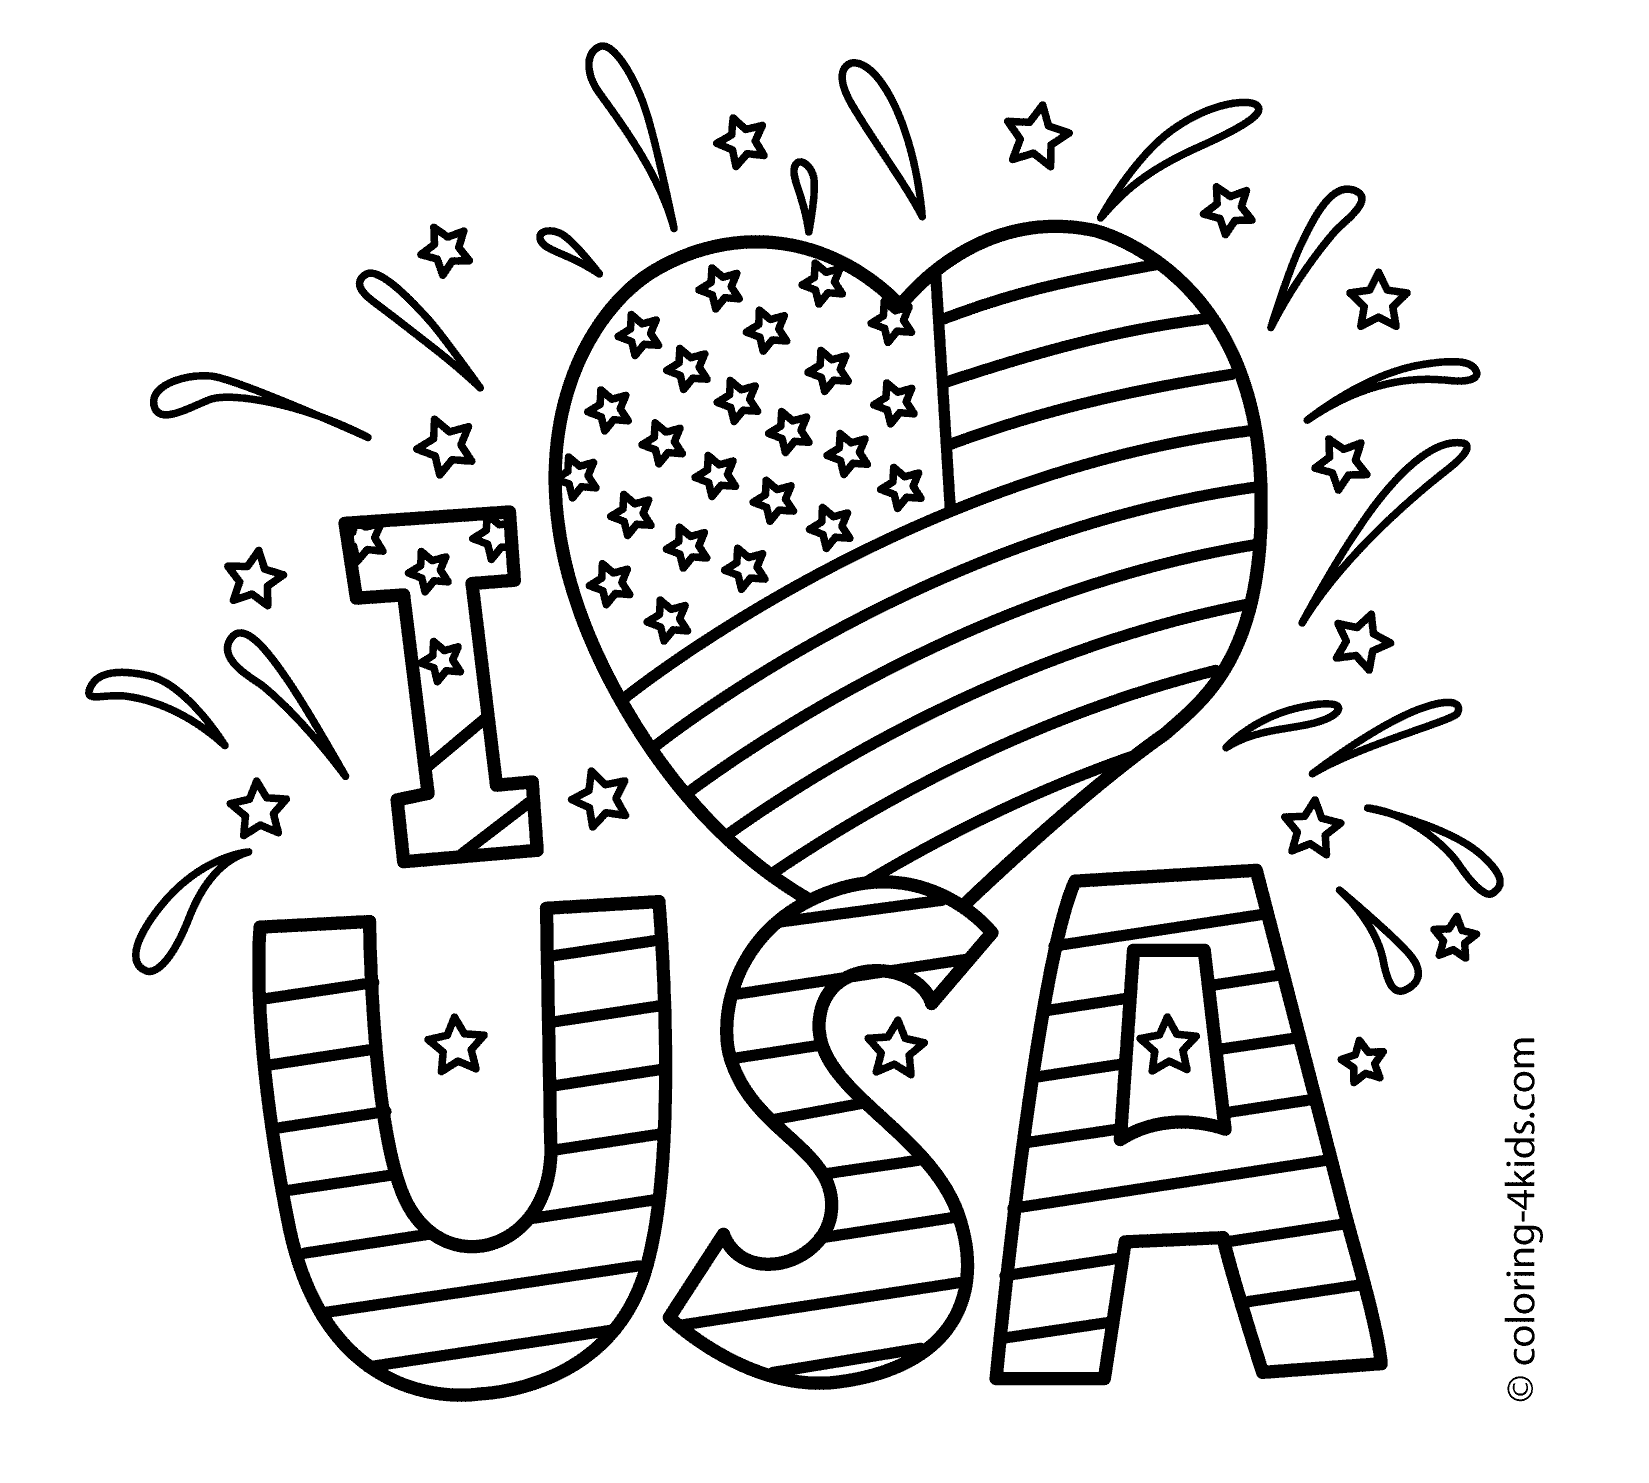 independence day colouring sheets 18 printable independence day coloring pages holiday vault independence day colouring sheets 